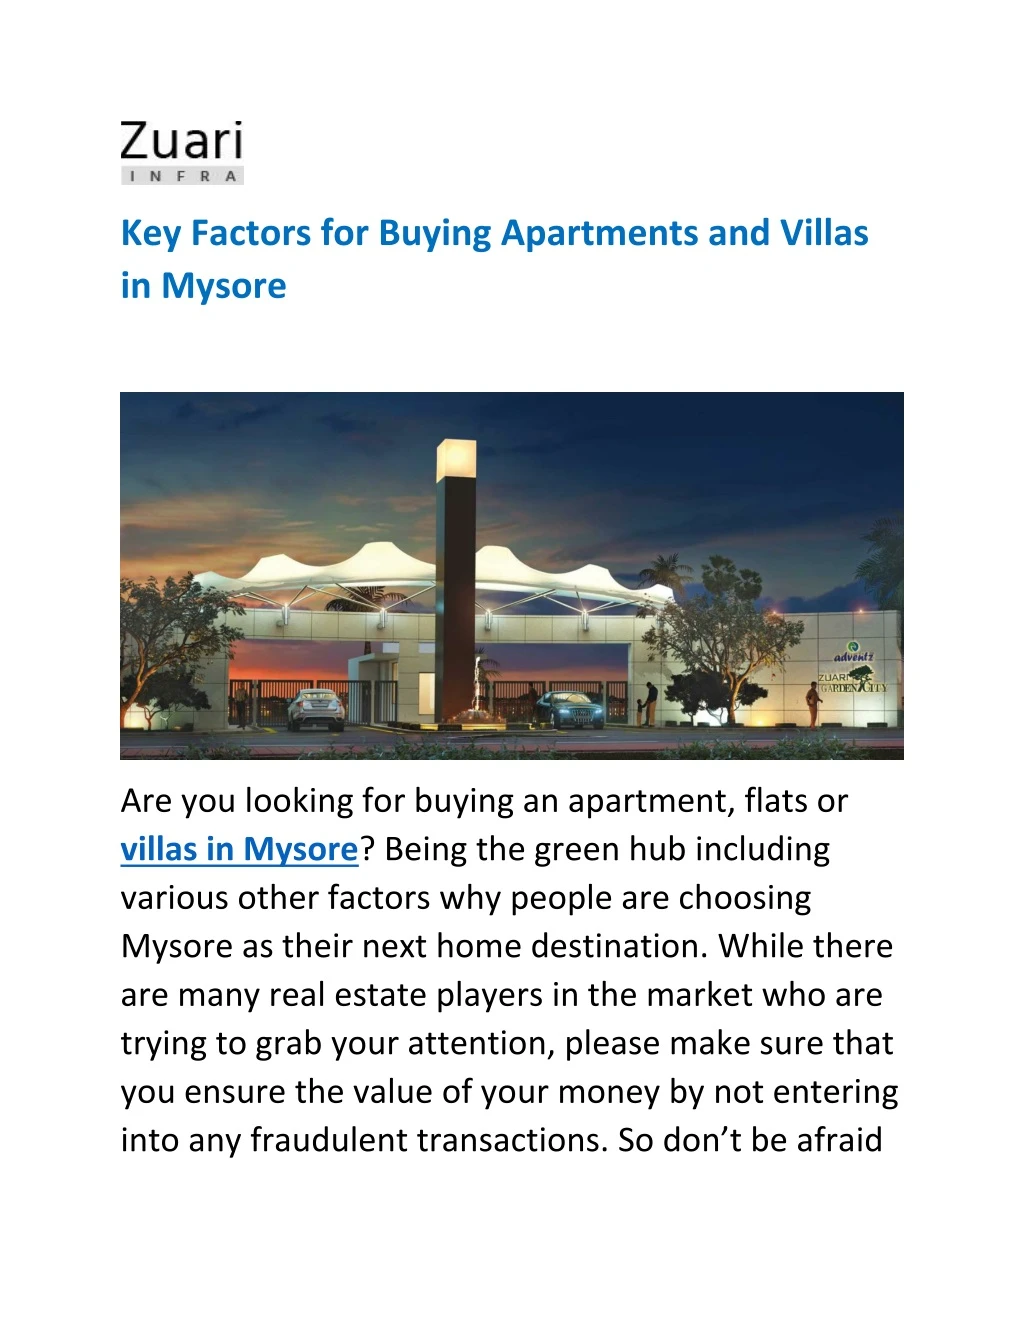 key factors for buying apartments and villas